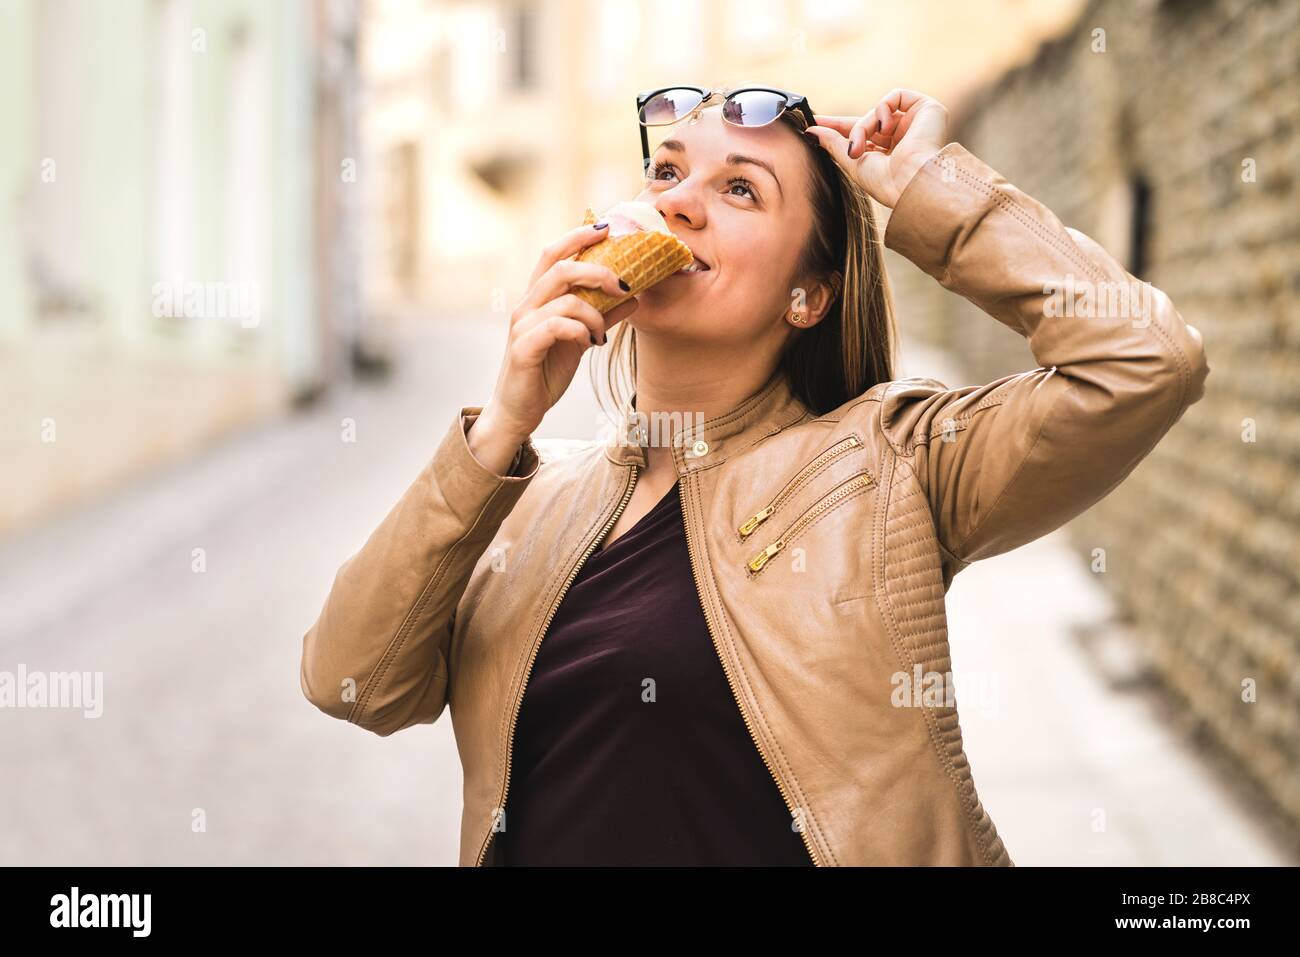 Woman lifting sunglasses and looking up while eating ice cream in city street. Tourist eating sweet dessert during travel. Stock Photo